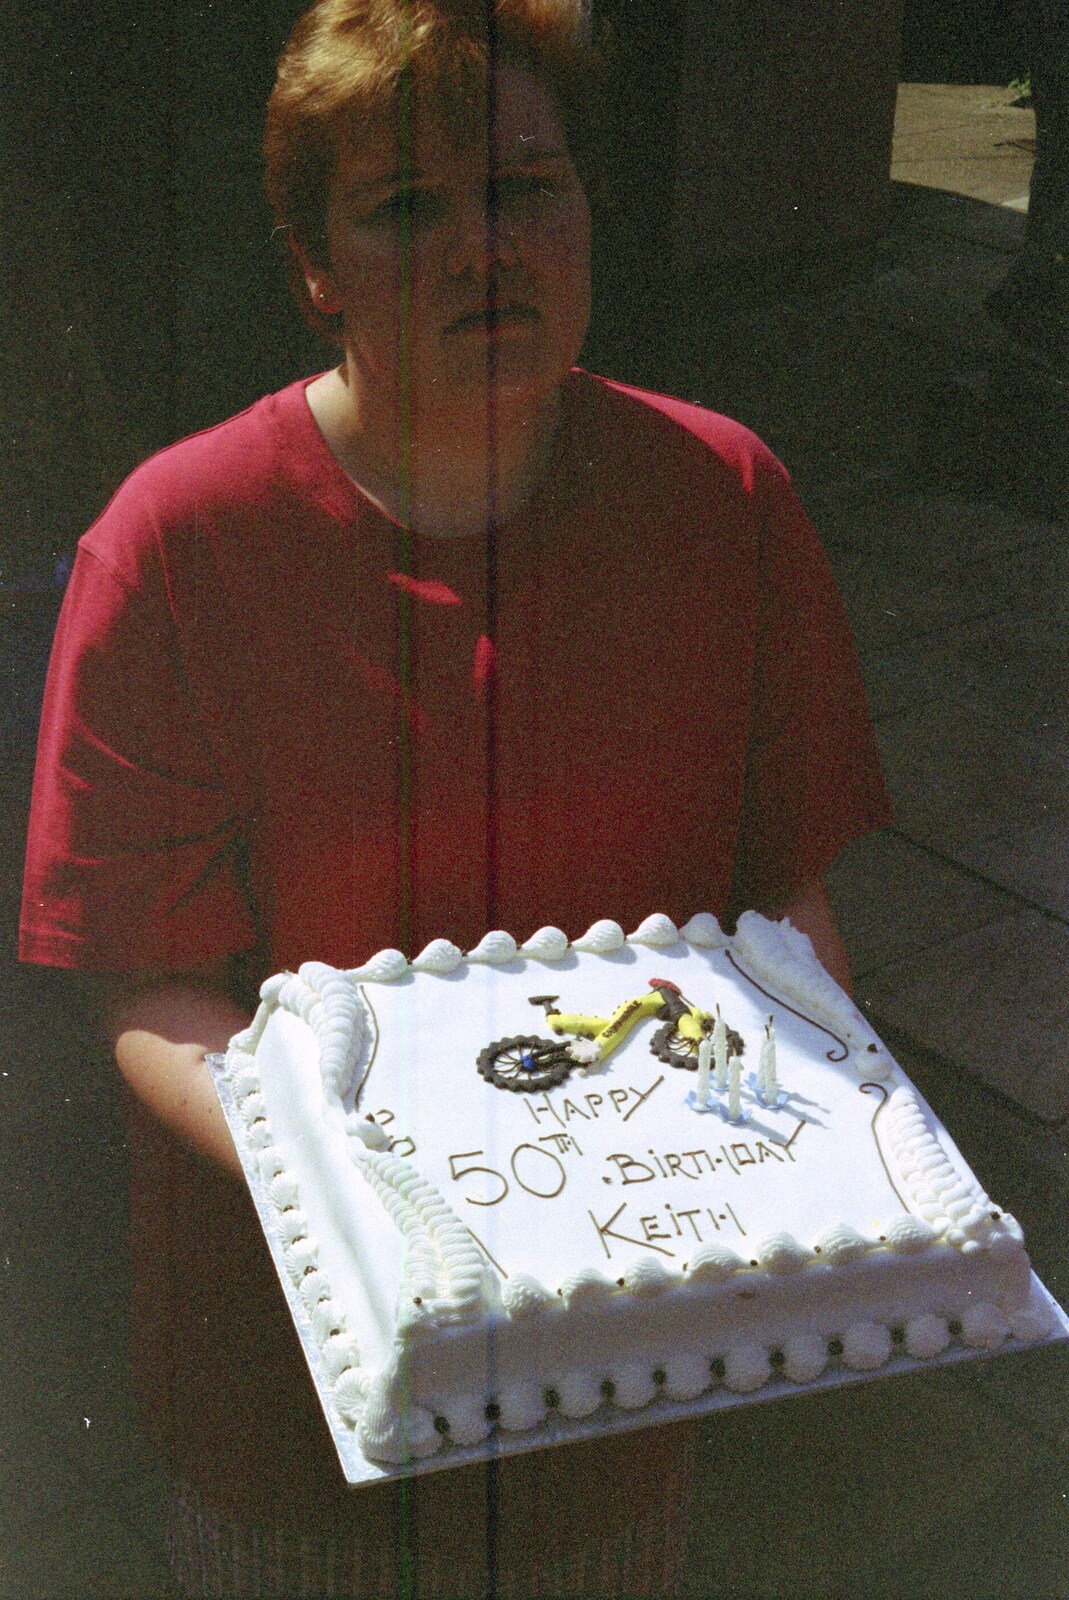 A cake arrives from The Brome Swan at Keith's 50th, Thrandeston, Suffolk  - June 2nd 1998